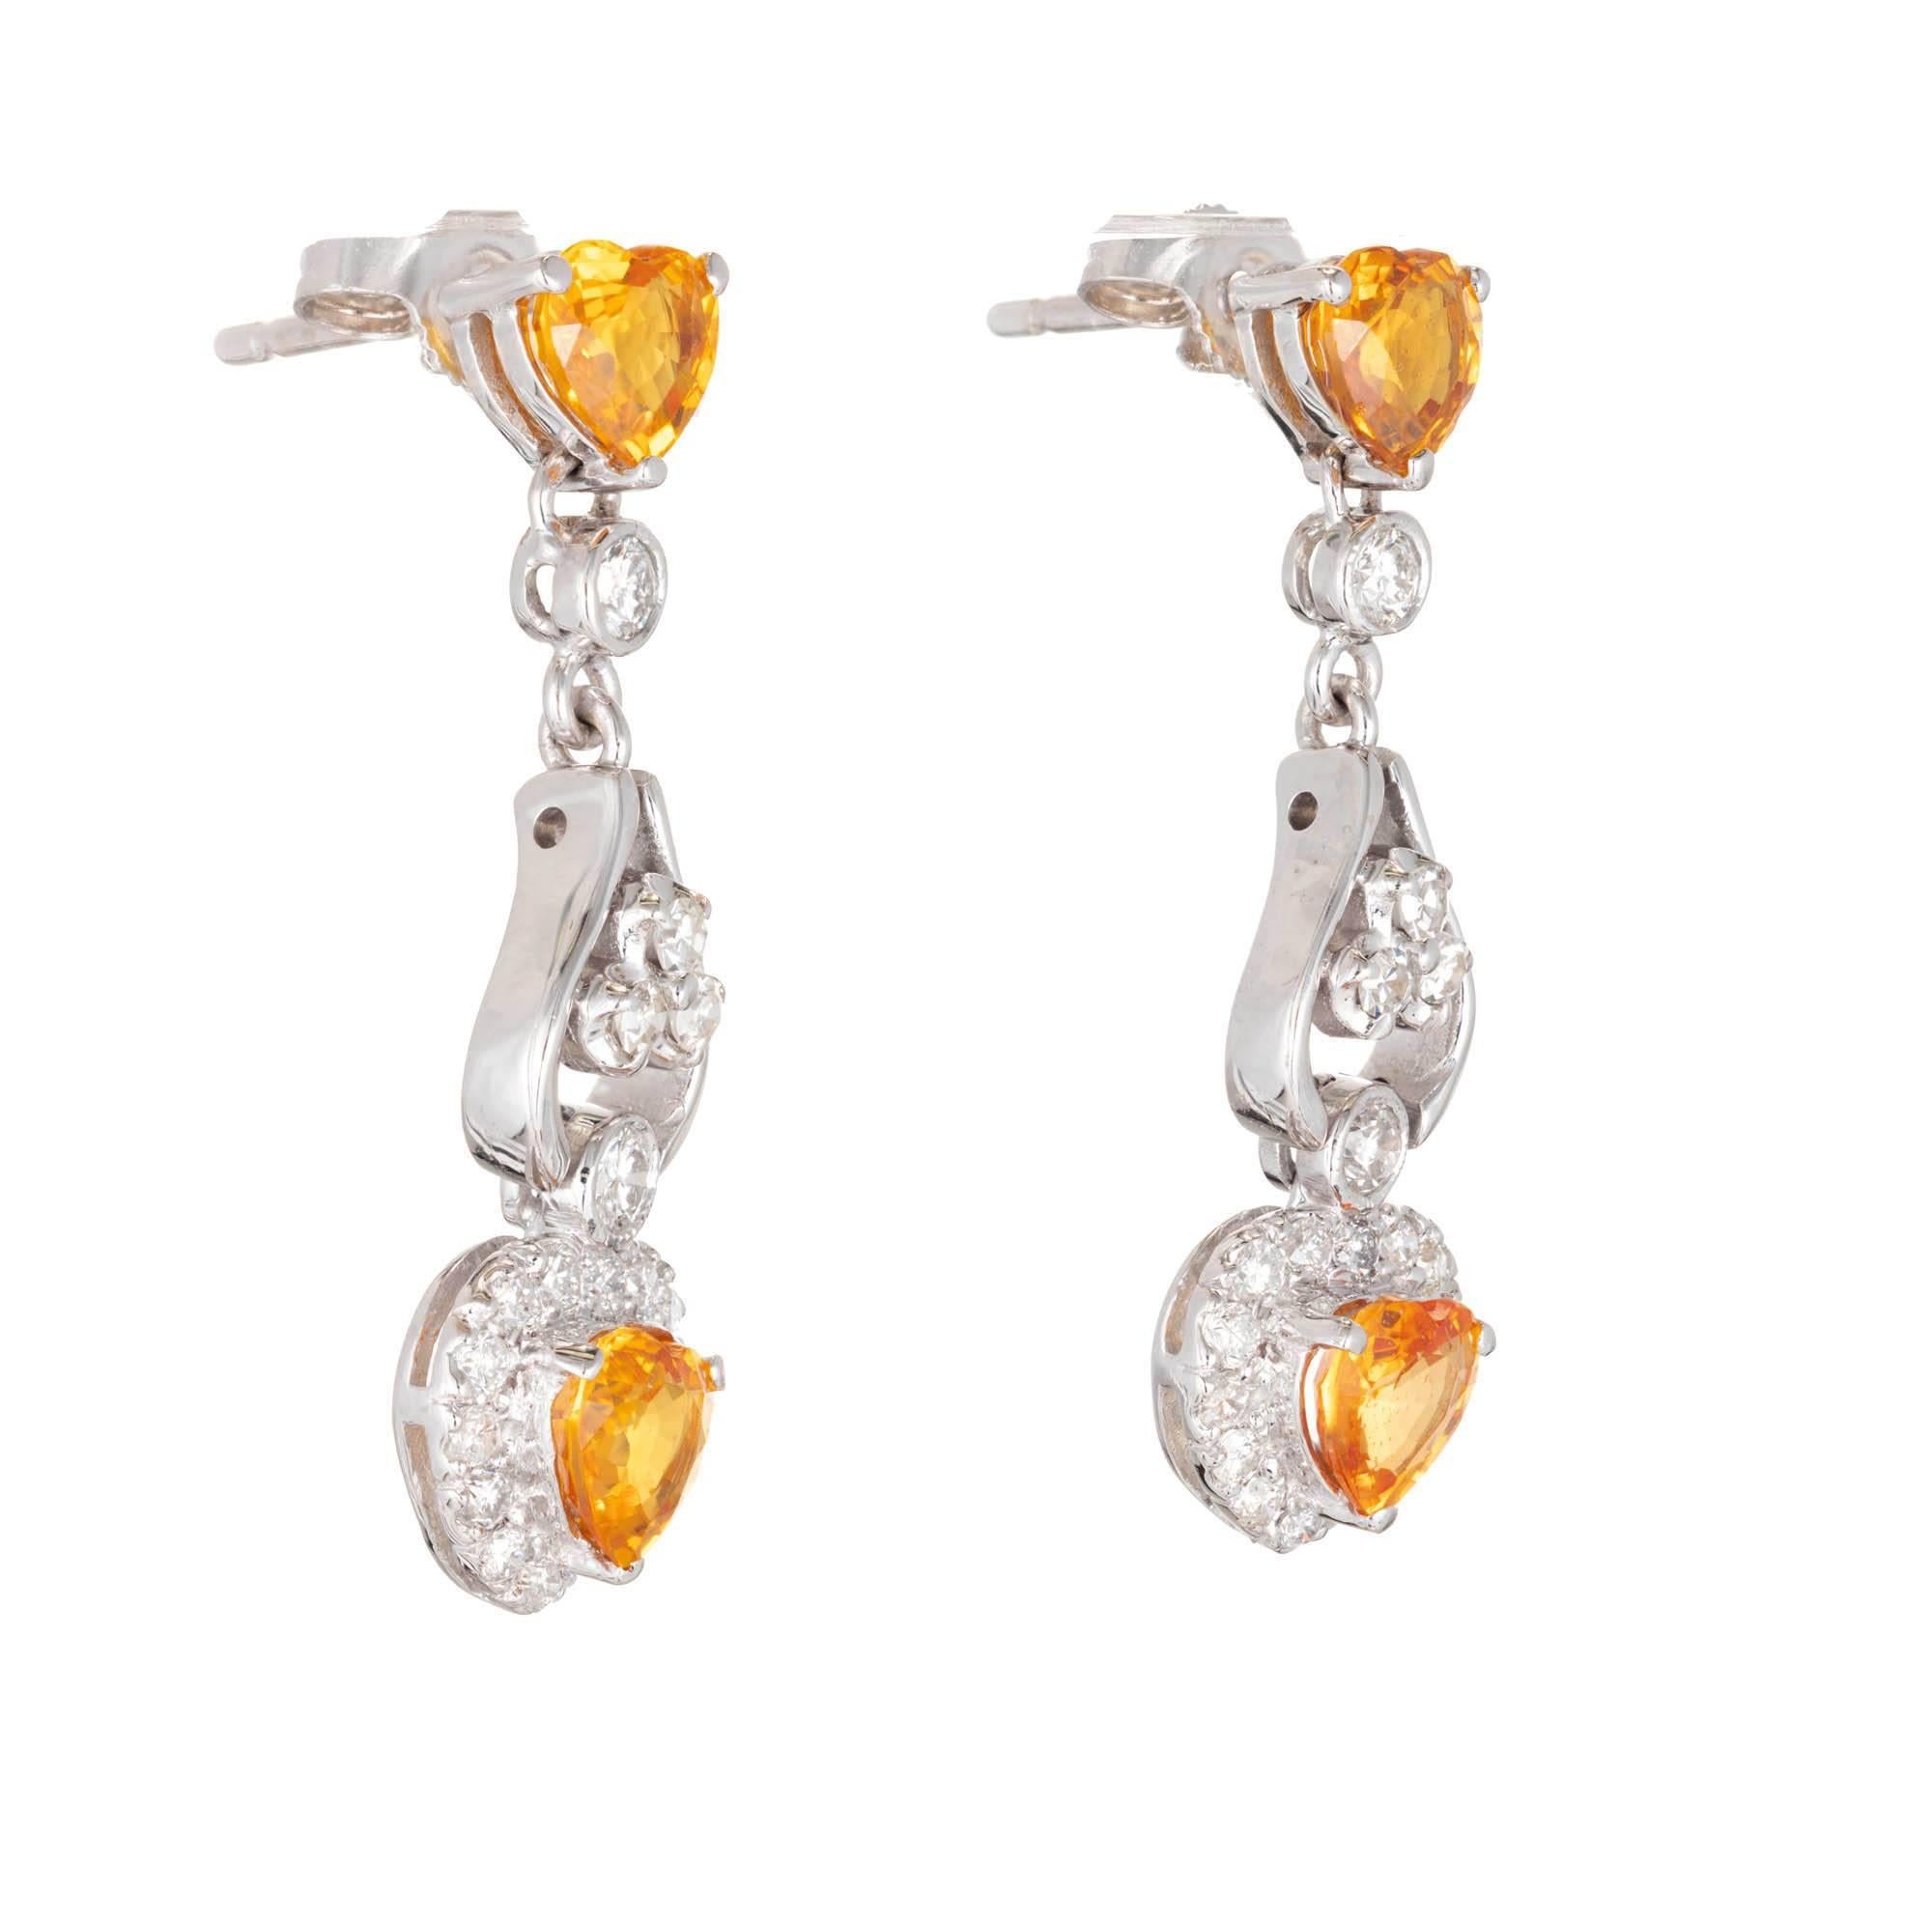 Yellow heart shaped sapphires with diamond halo dangle earrings. 14k white gold dangle earrings with bright yellow Sapphires and bright white diamonds.

4 bright yellow heart Sapphires, approx. total weight 1.11cts, natural and no heat treatment
6